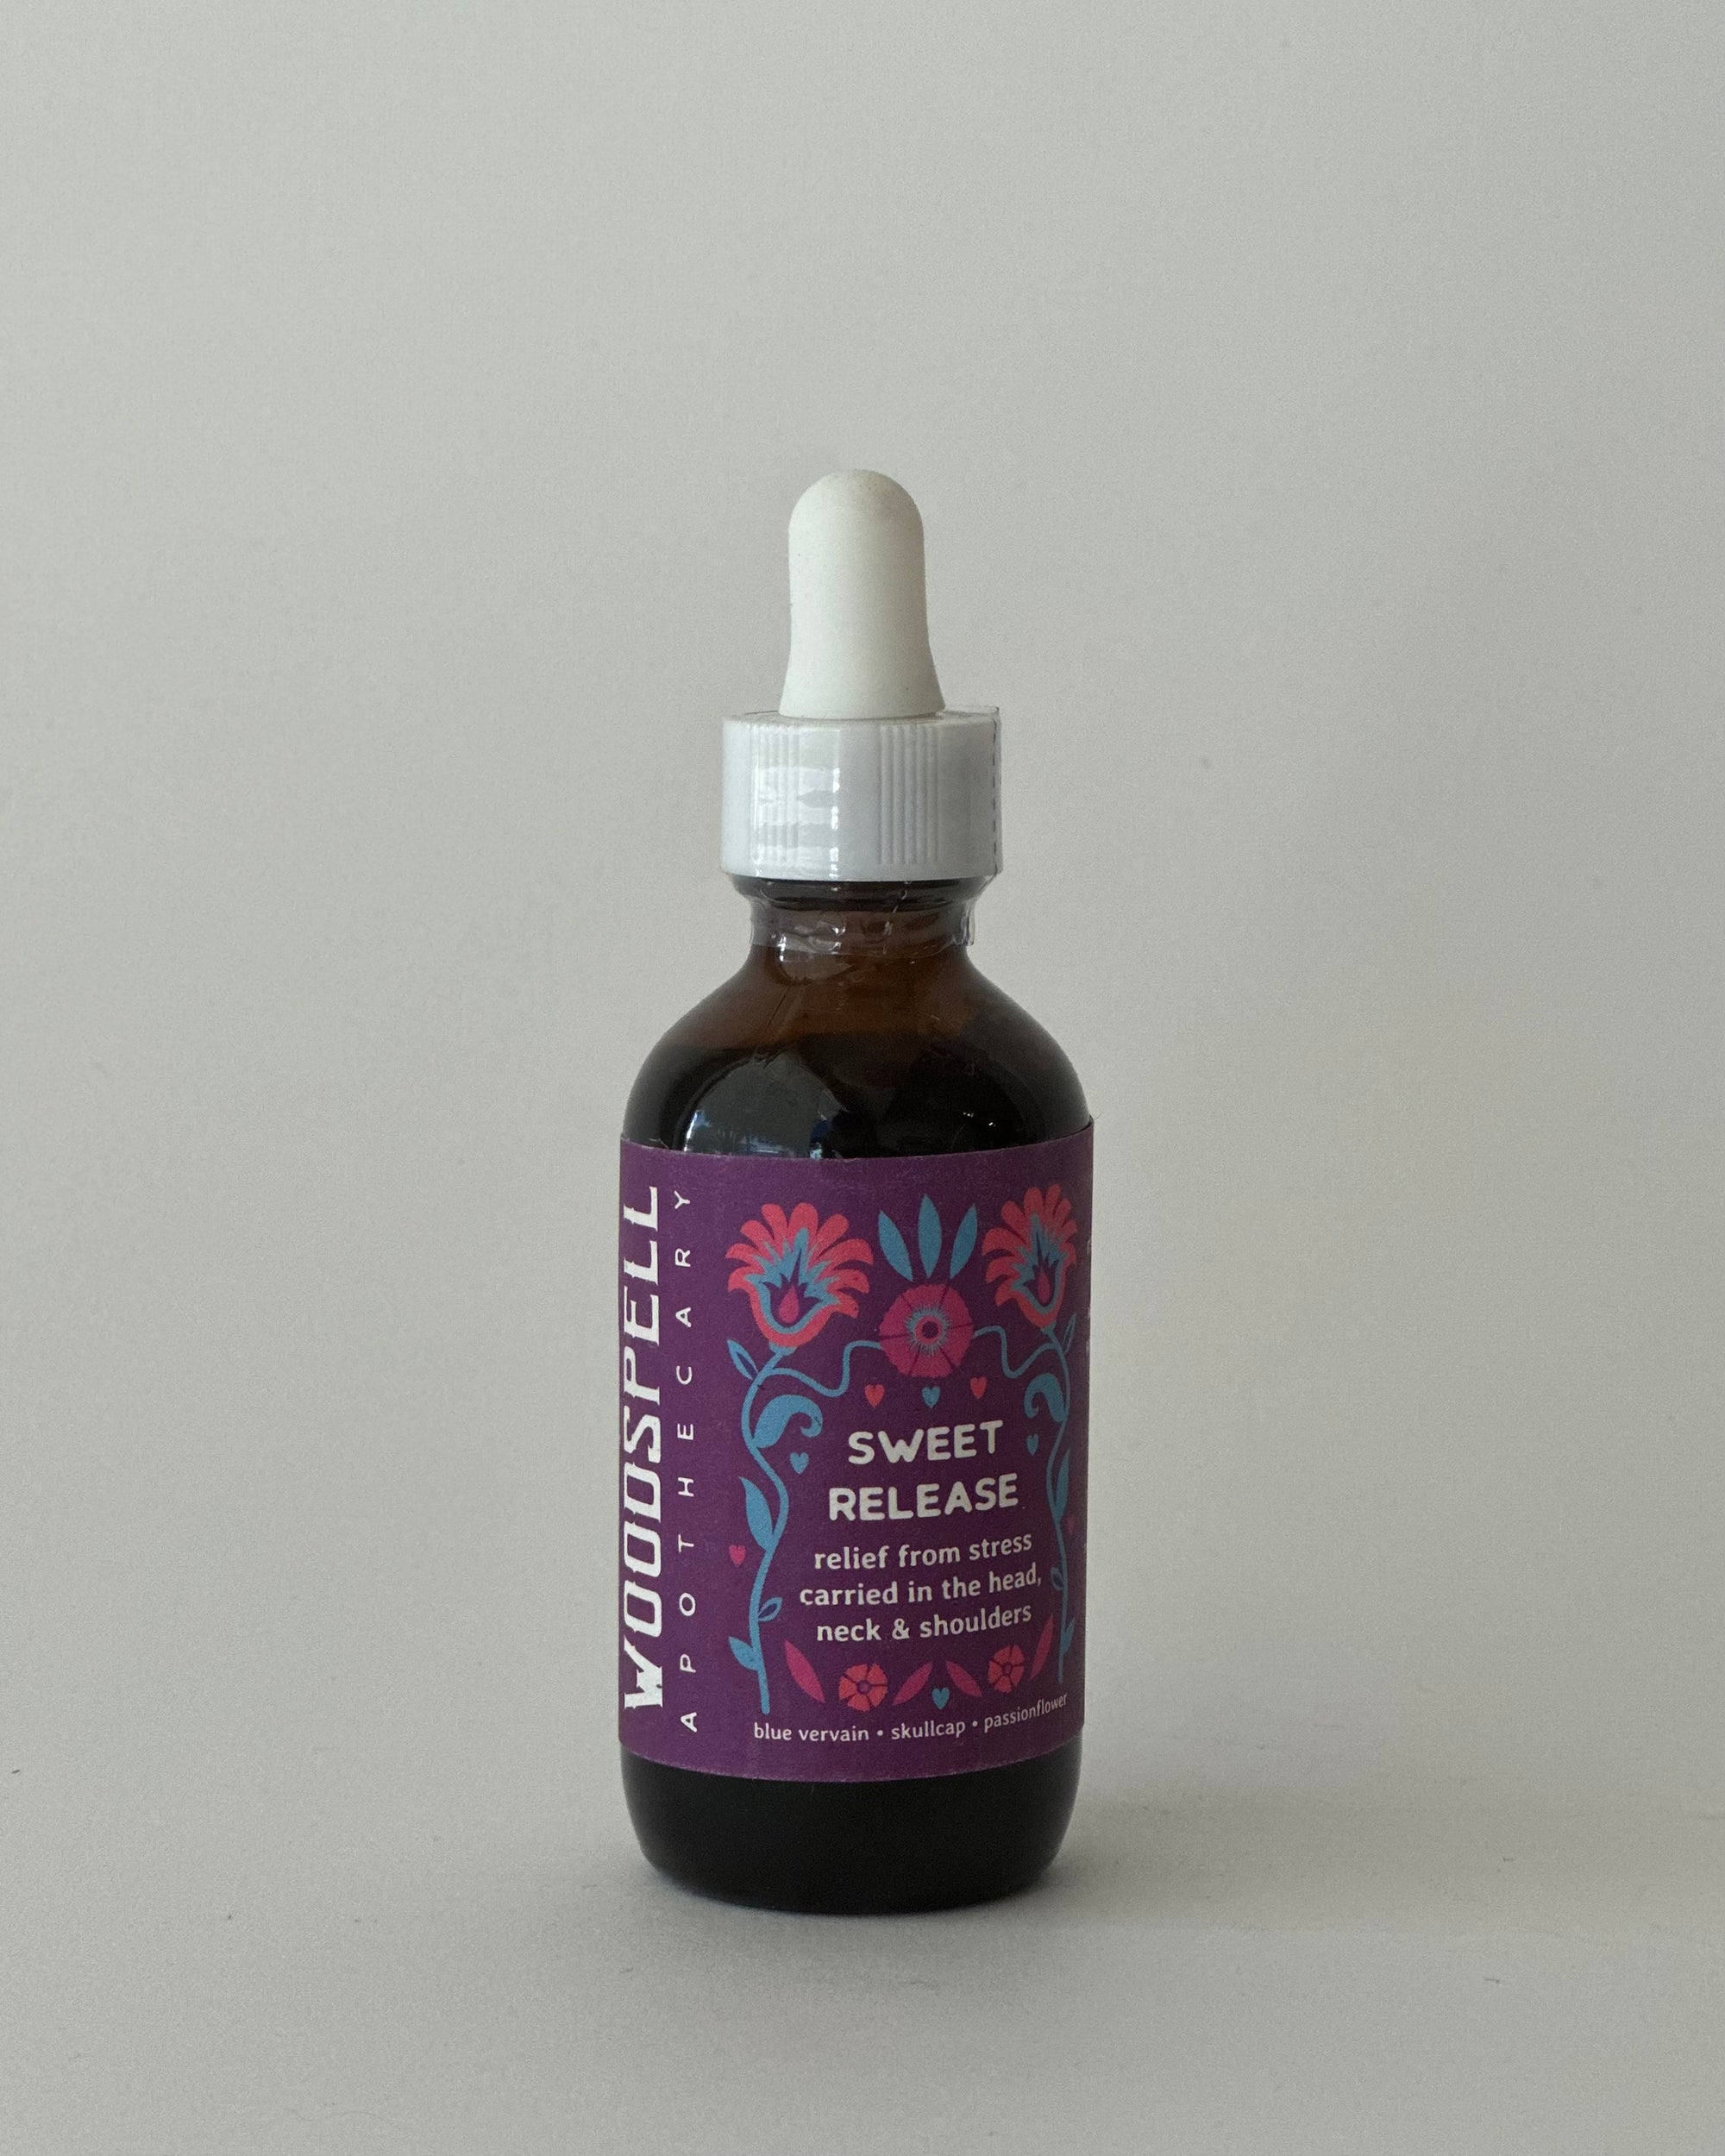 Woodspell – Sweet Release | Stress & Tension Relief Tonic